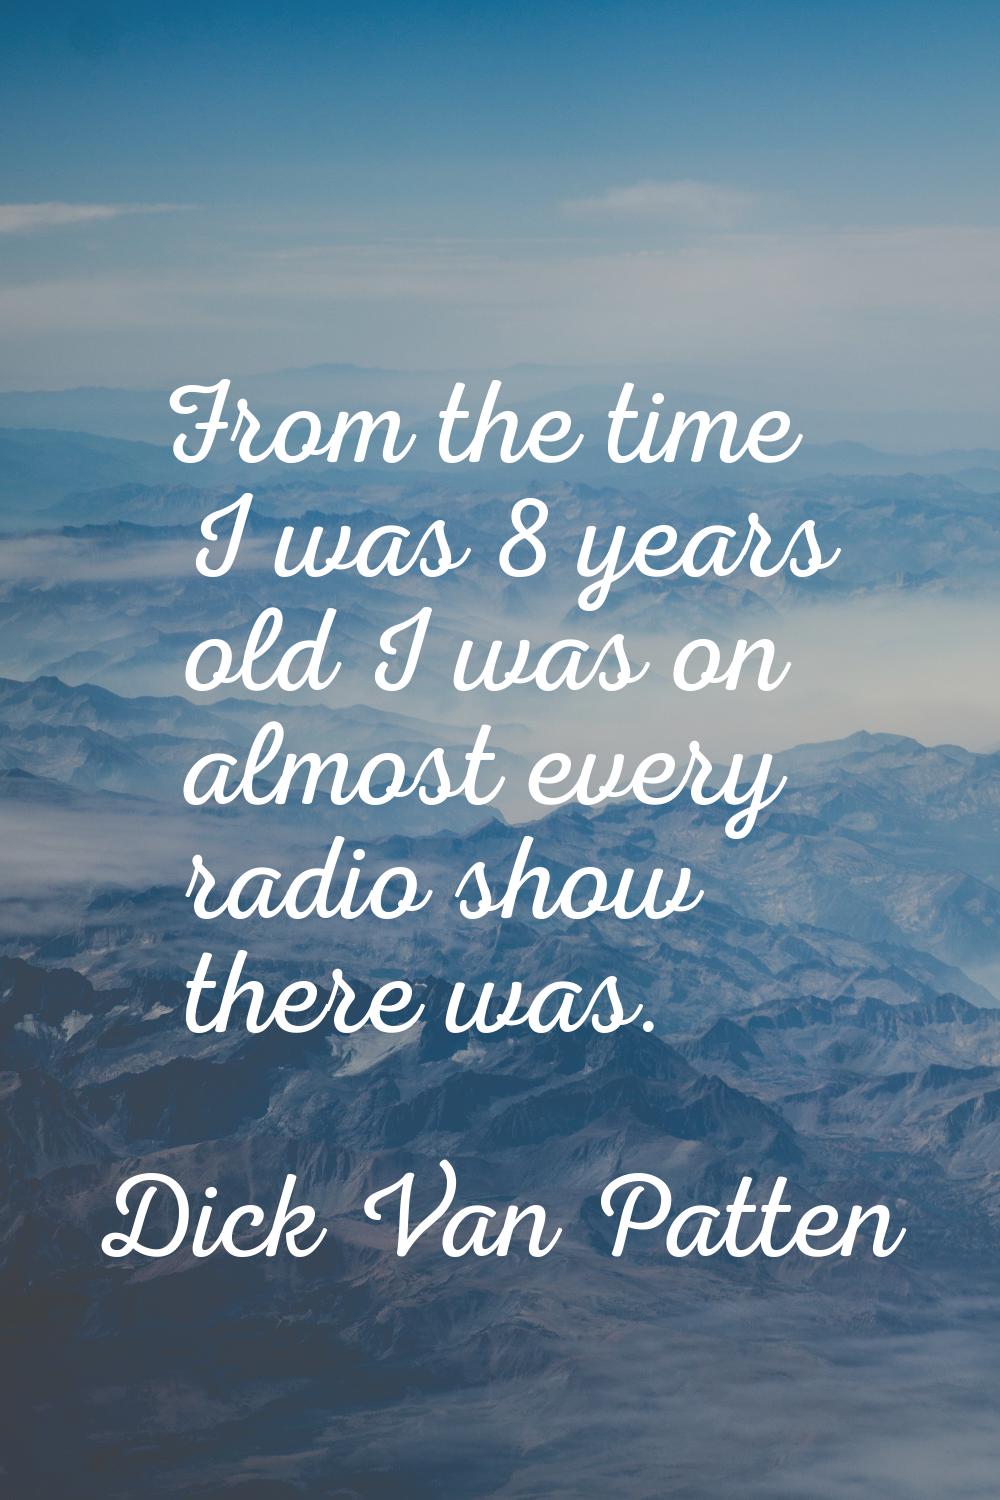 From the time I was 8 years old I was on almost every radio show there was.